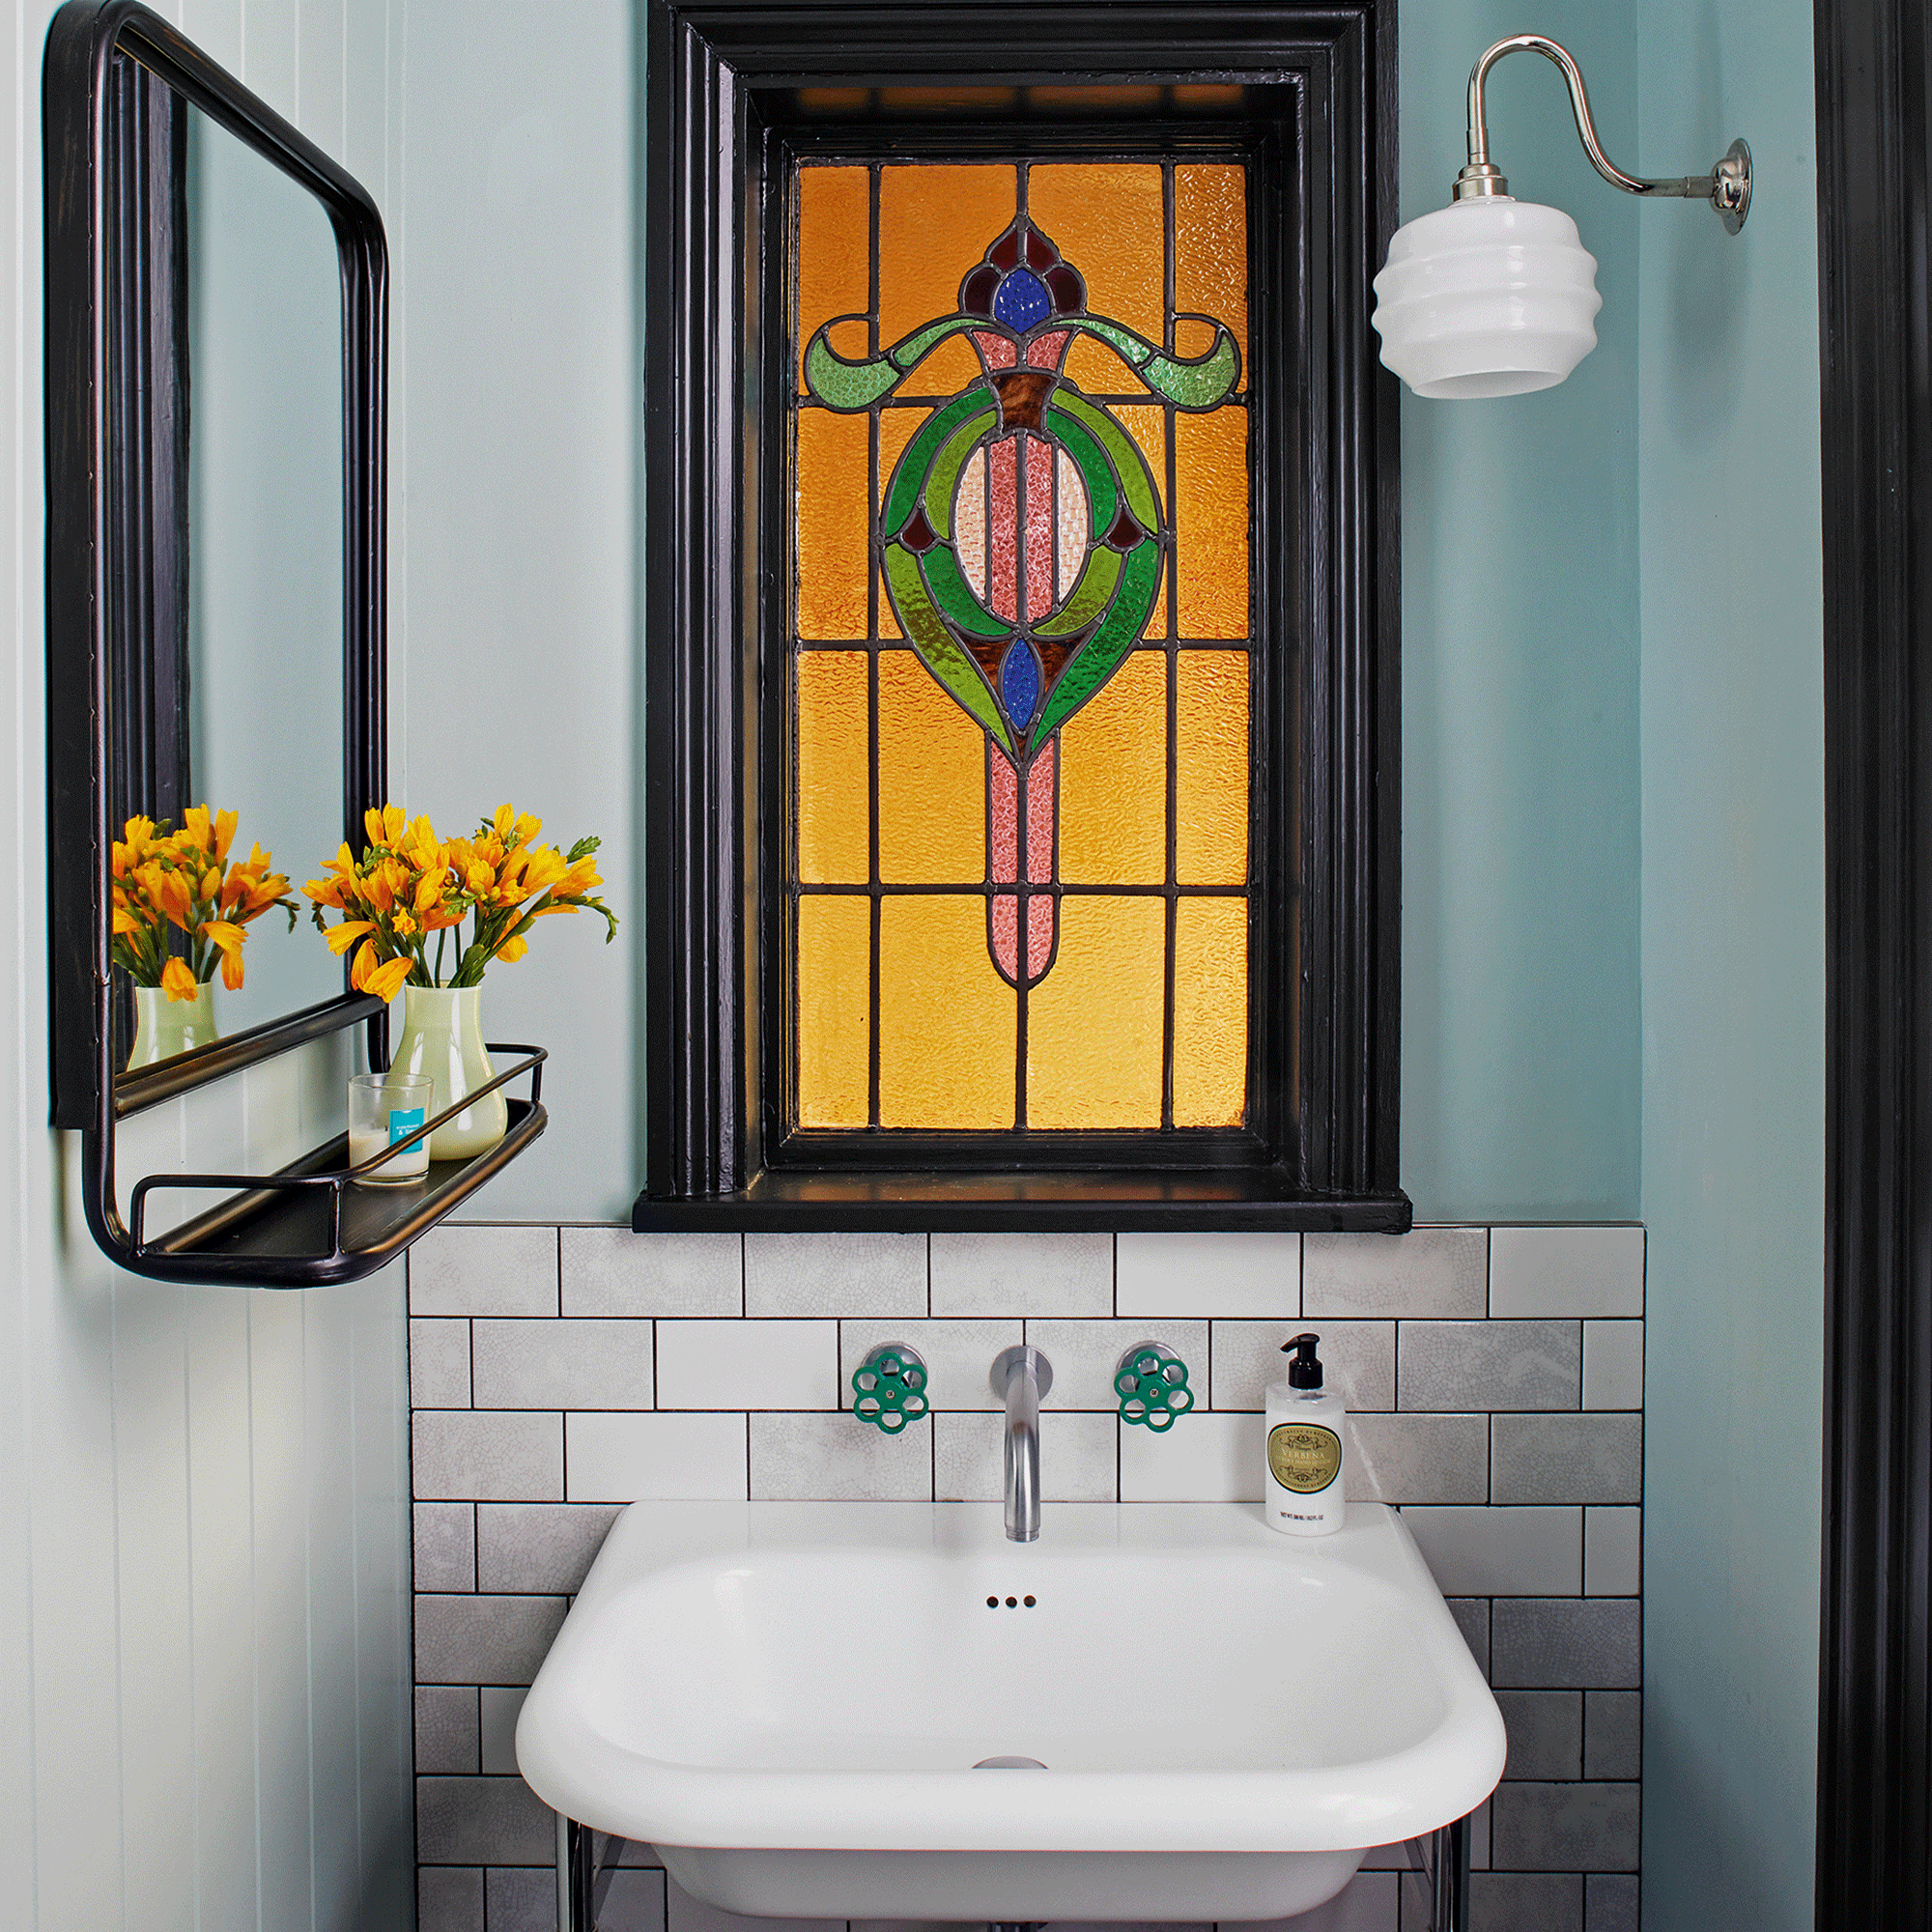 Blue bathroom with stained glass window